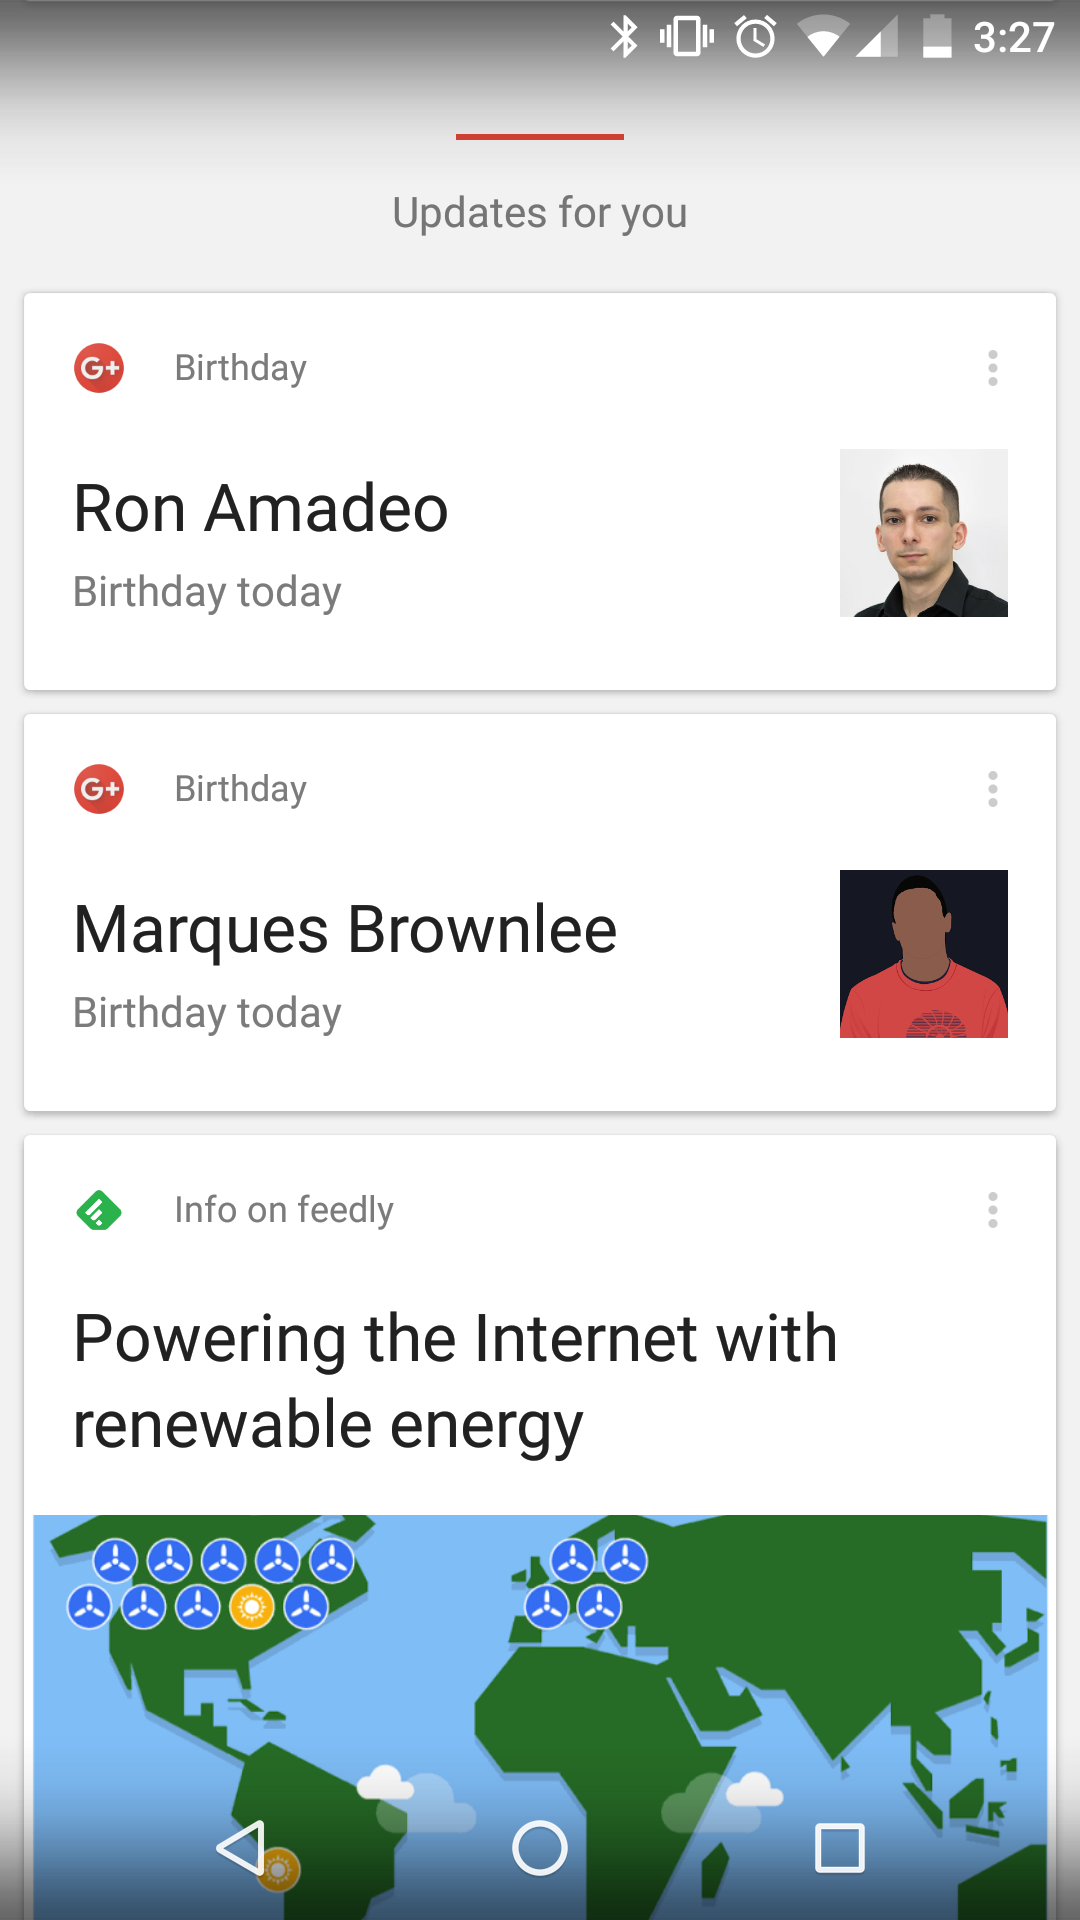 Happy birthday Ron Amadeo and Marques Brownlee !  